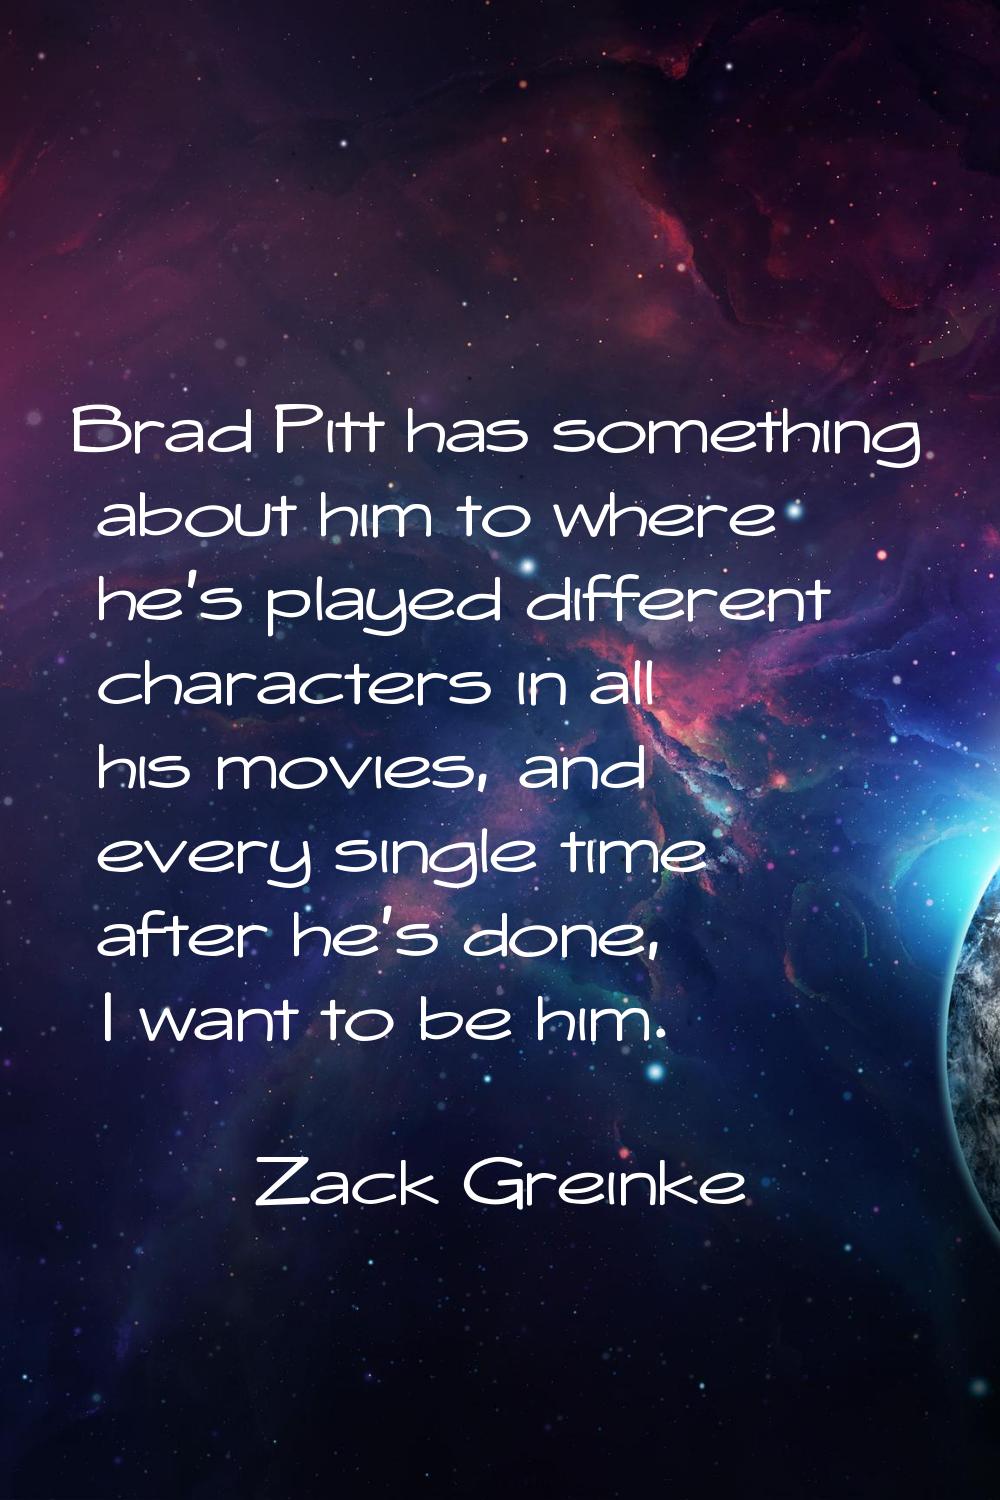 Brad Pitt has something about him to where he's played different characters in all his movies, and 